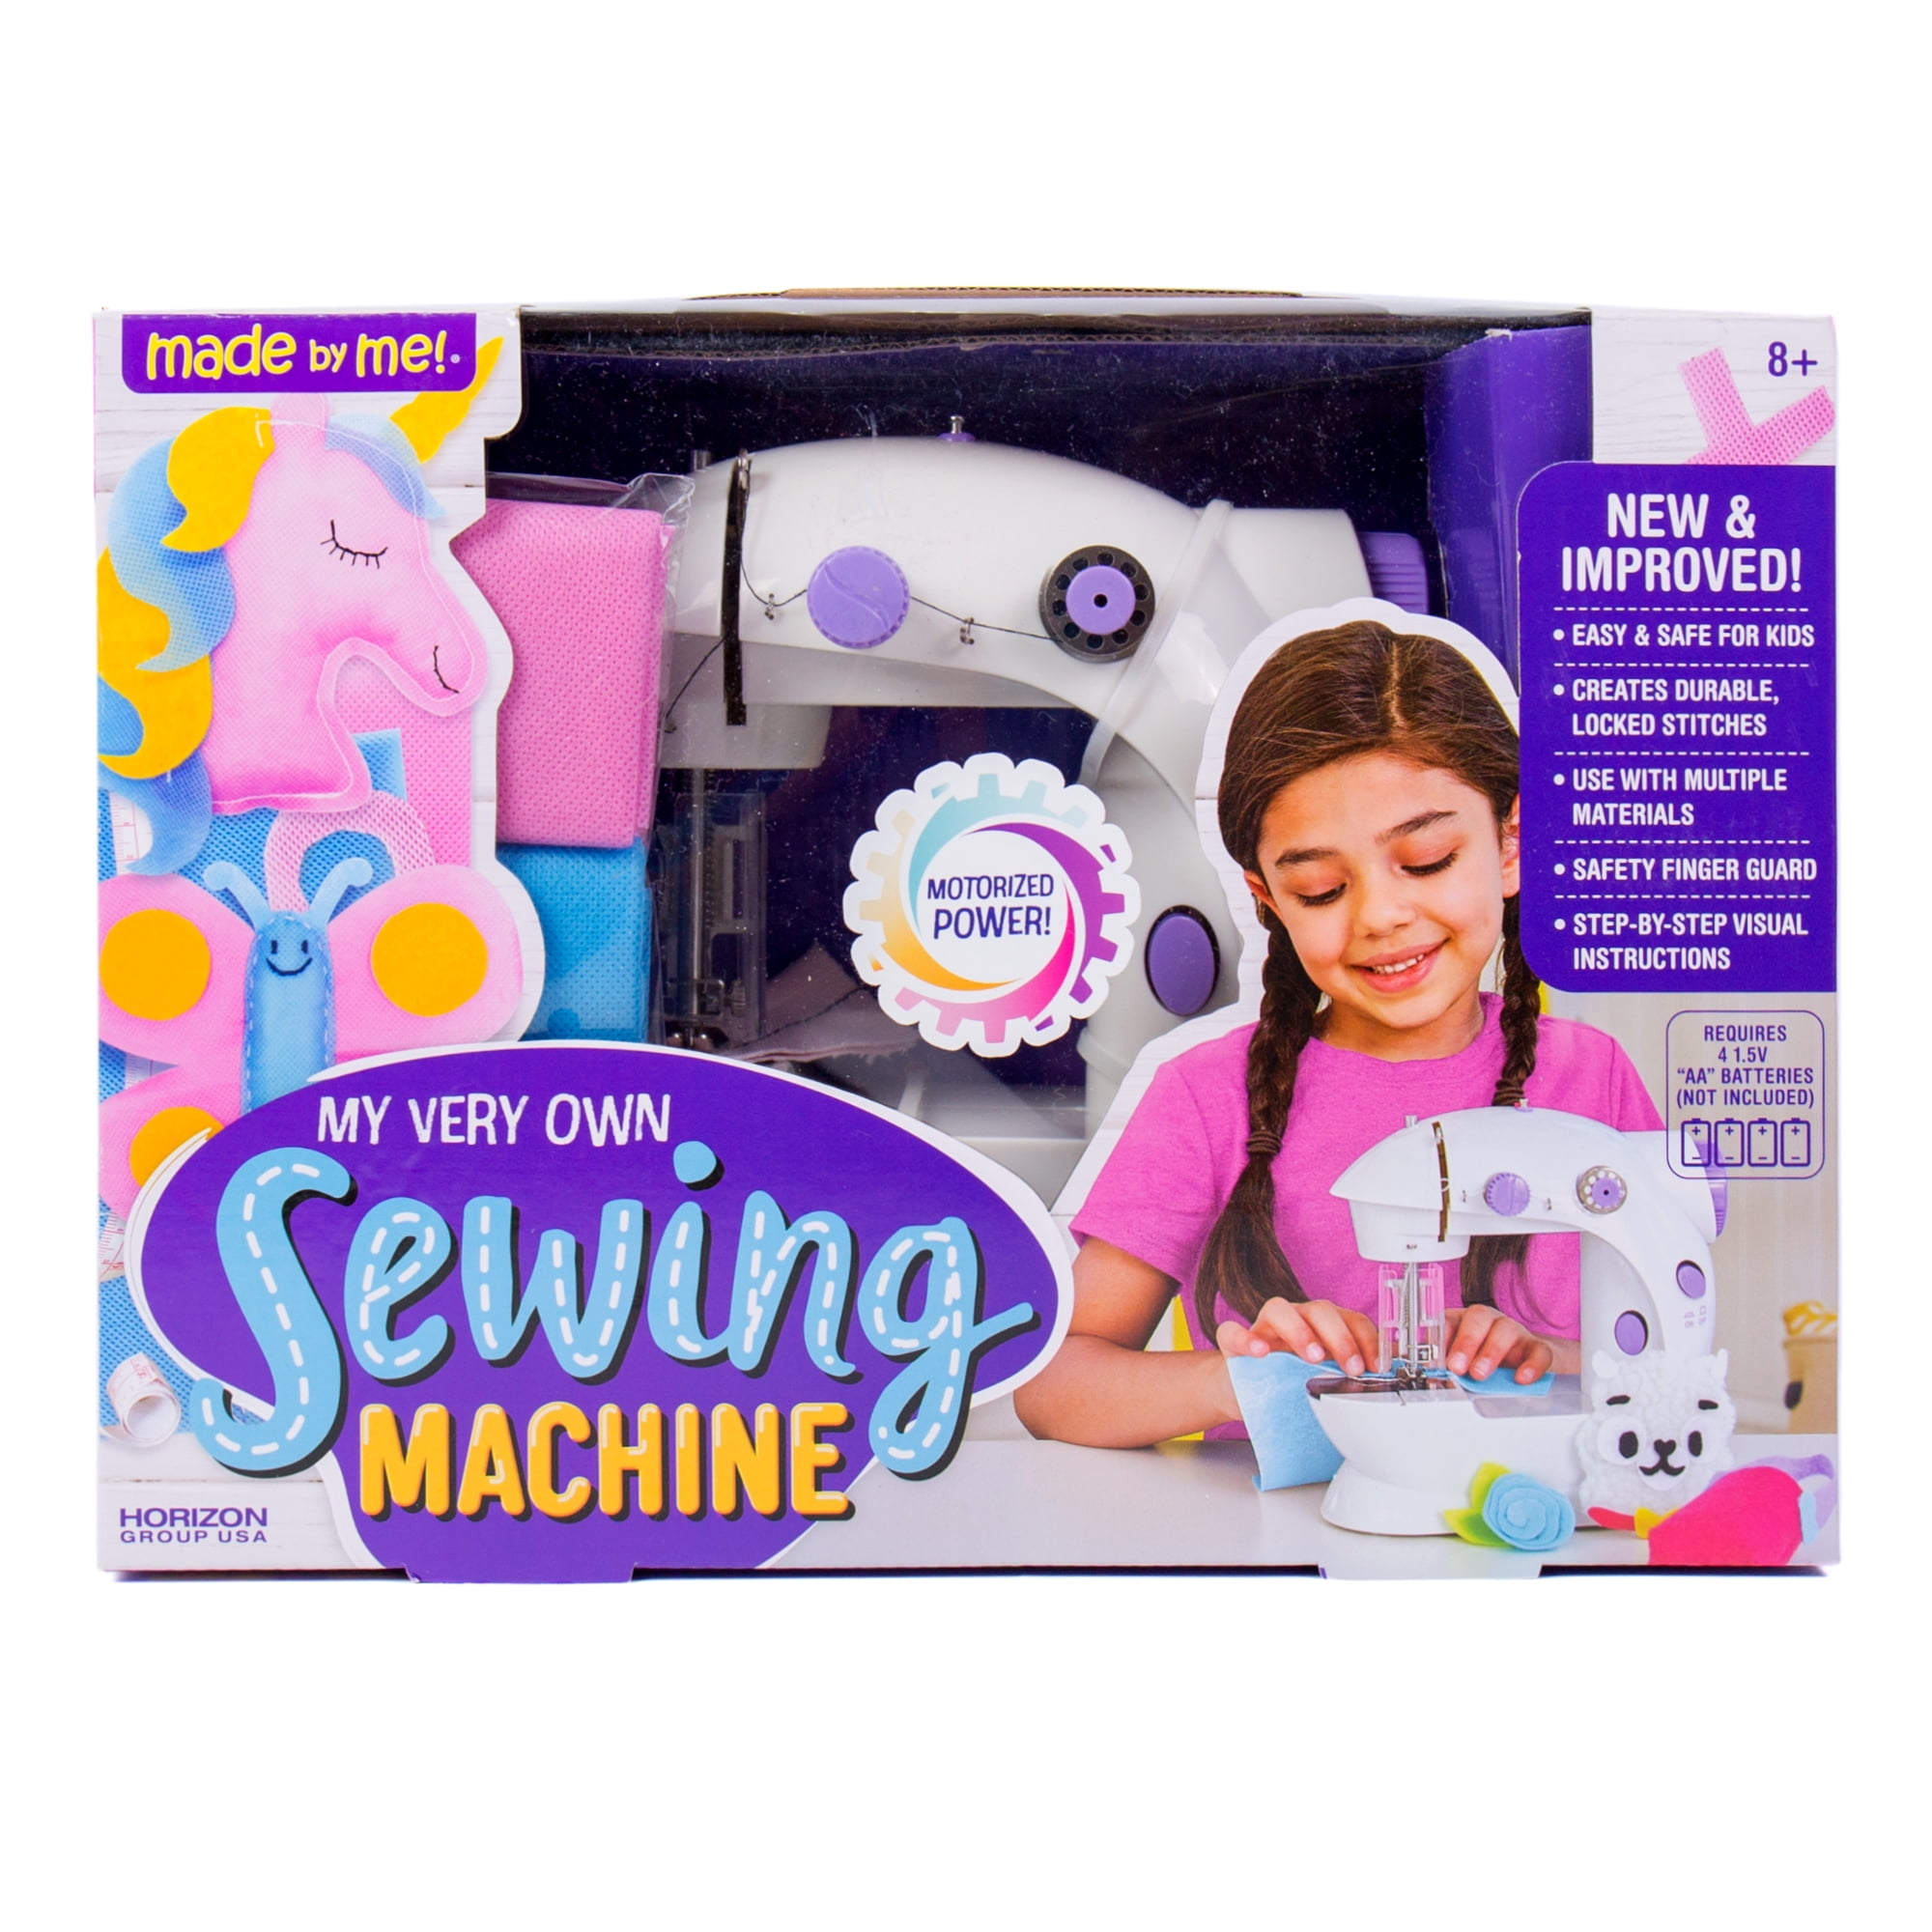 BSHAPPLUS® Portable Sewing Machine,40 Piece Handheld Electric Sewing  Machines Kit,12 Stitch Patterns Mini Sewing Machine for Beginners  Kids,Household